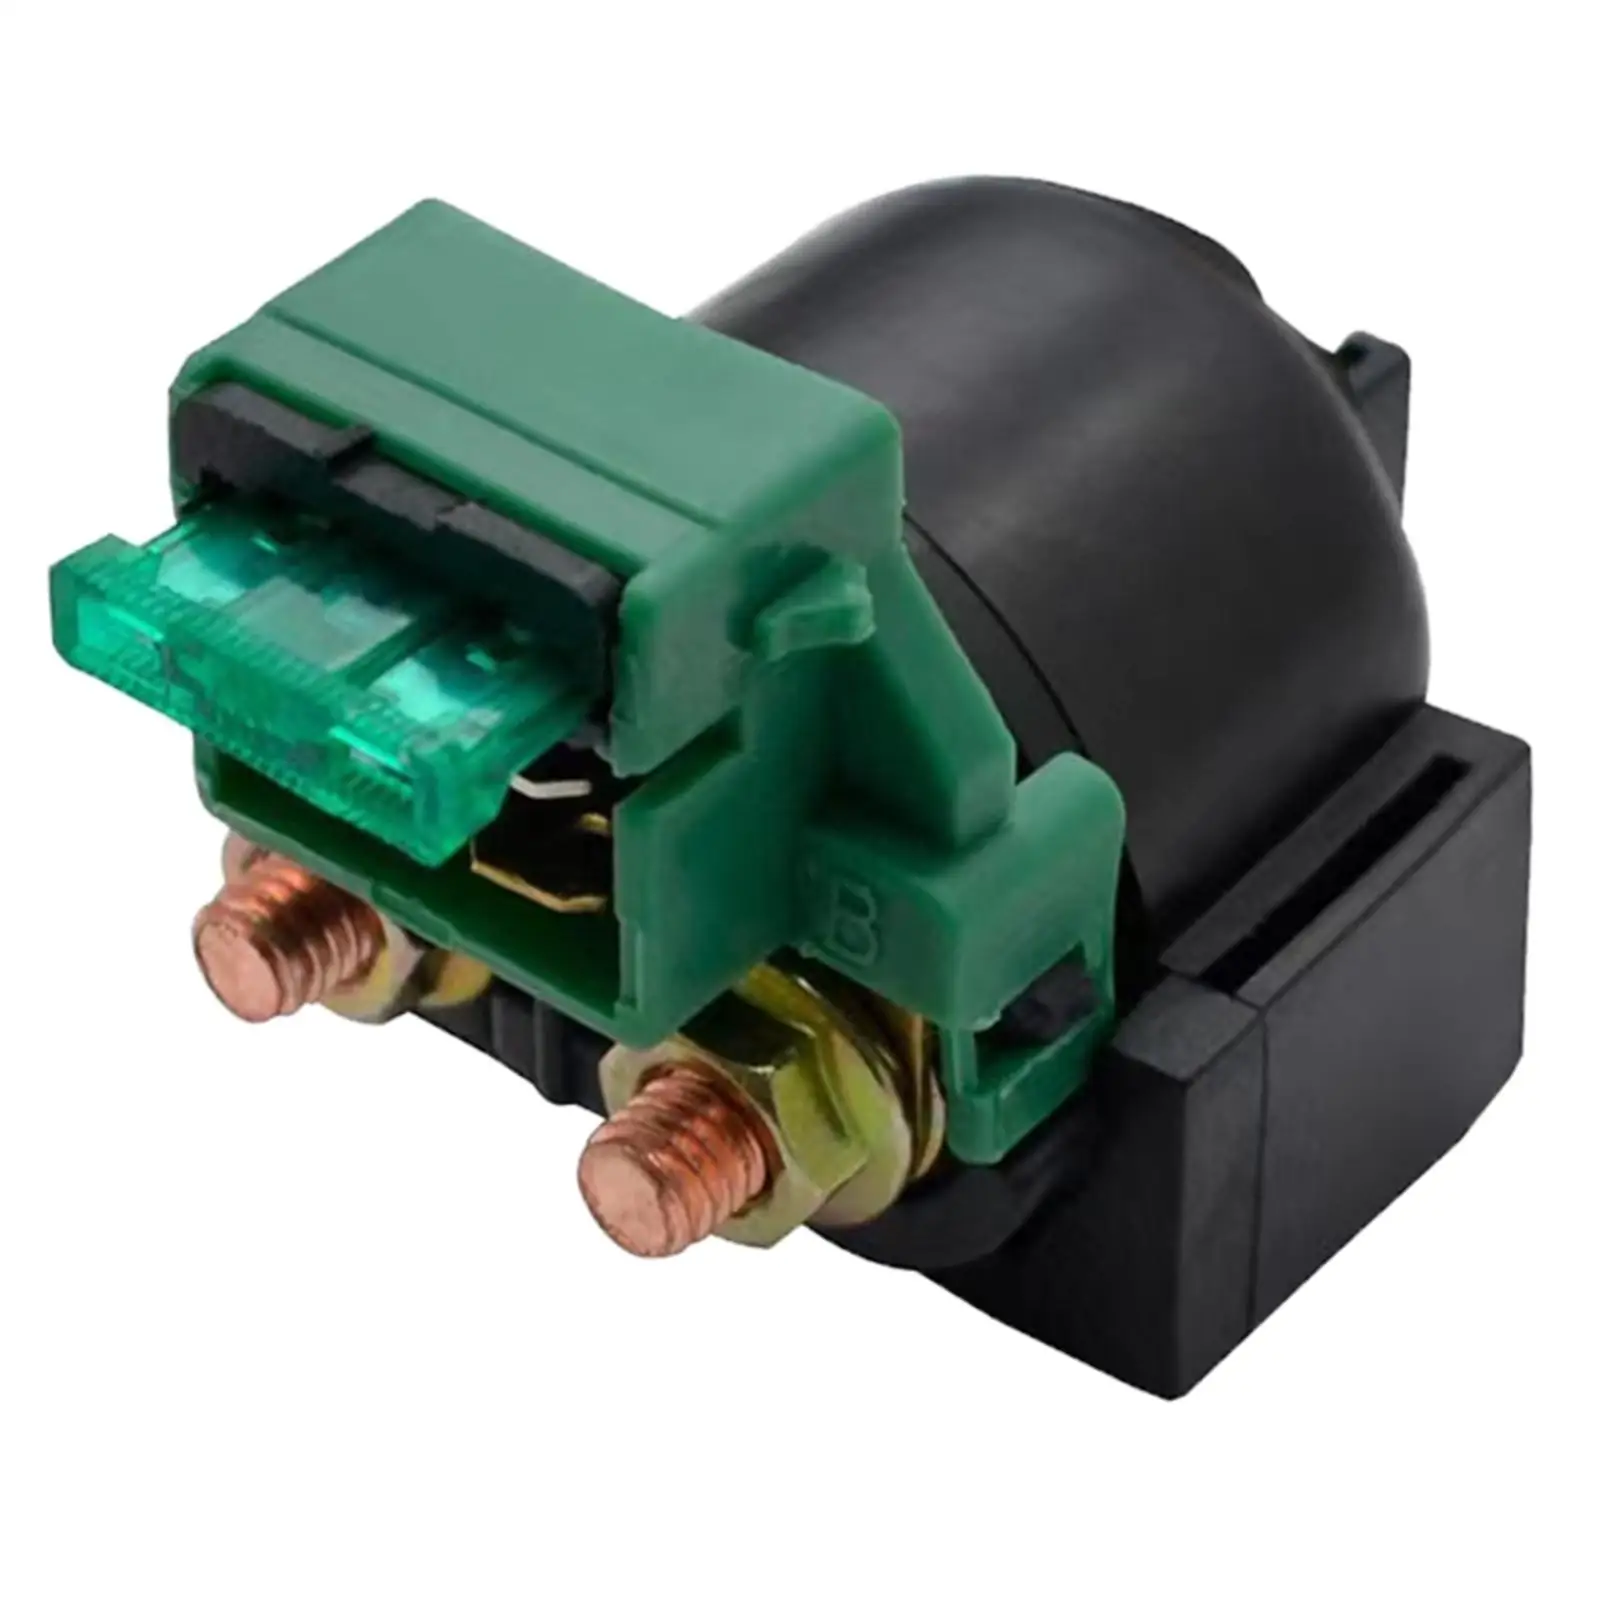 Starter Motor Solenoid Relay Green Electrical Relay Switch for Suzuki GS500 1990-09 Gw250 GSX250R DL250 Motorcycle Parts